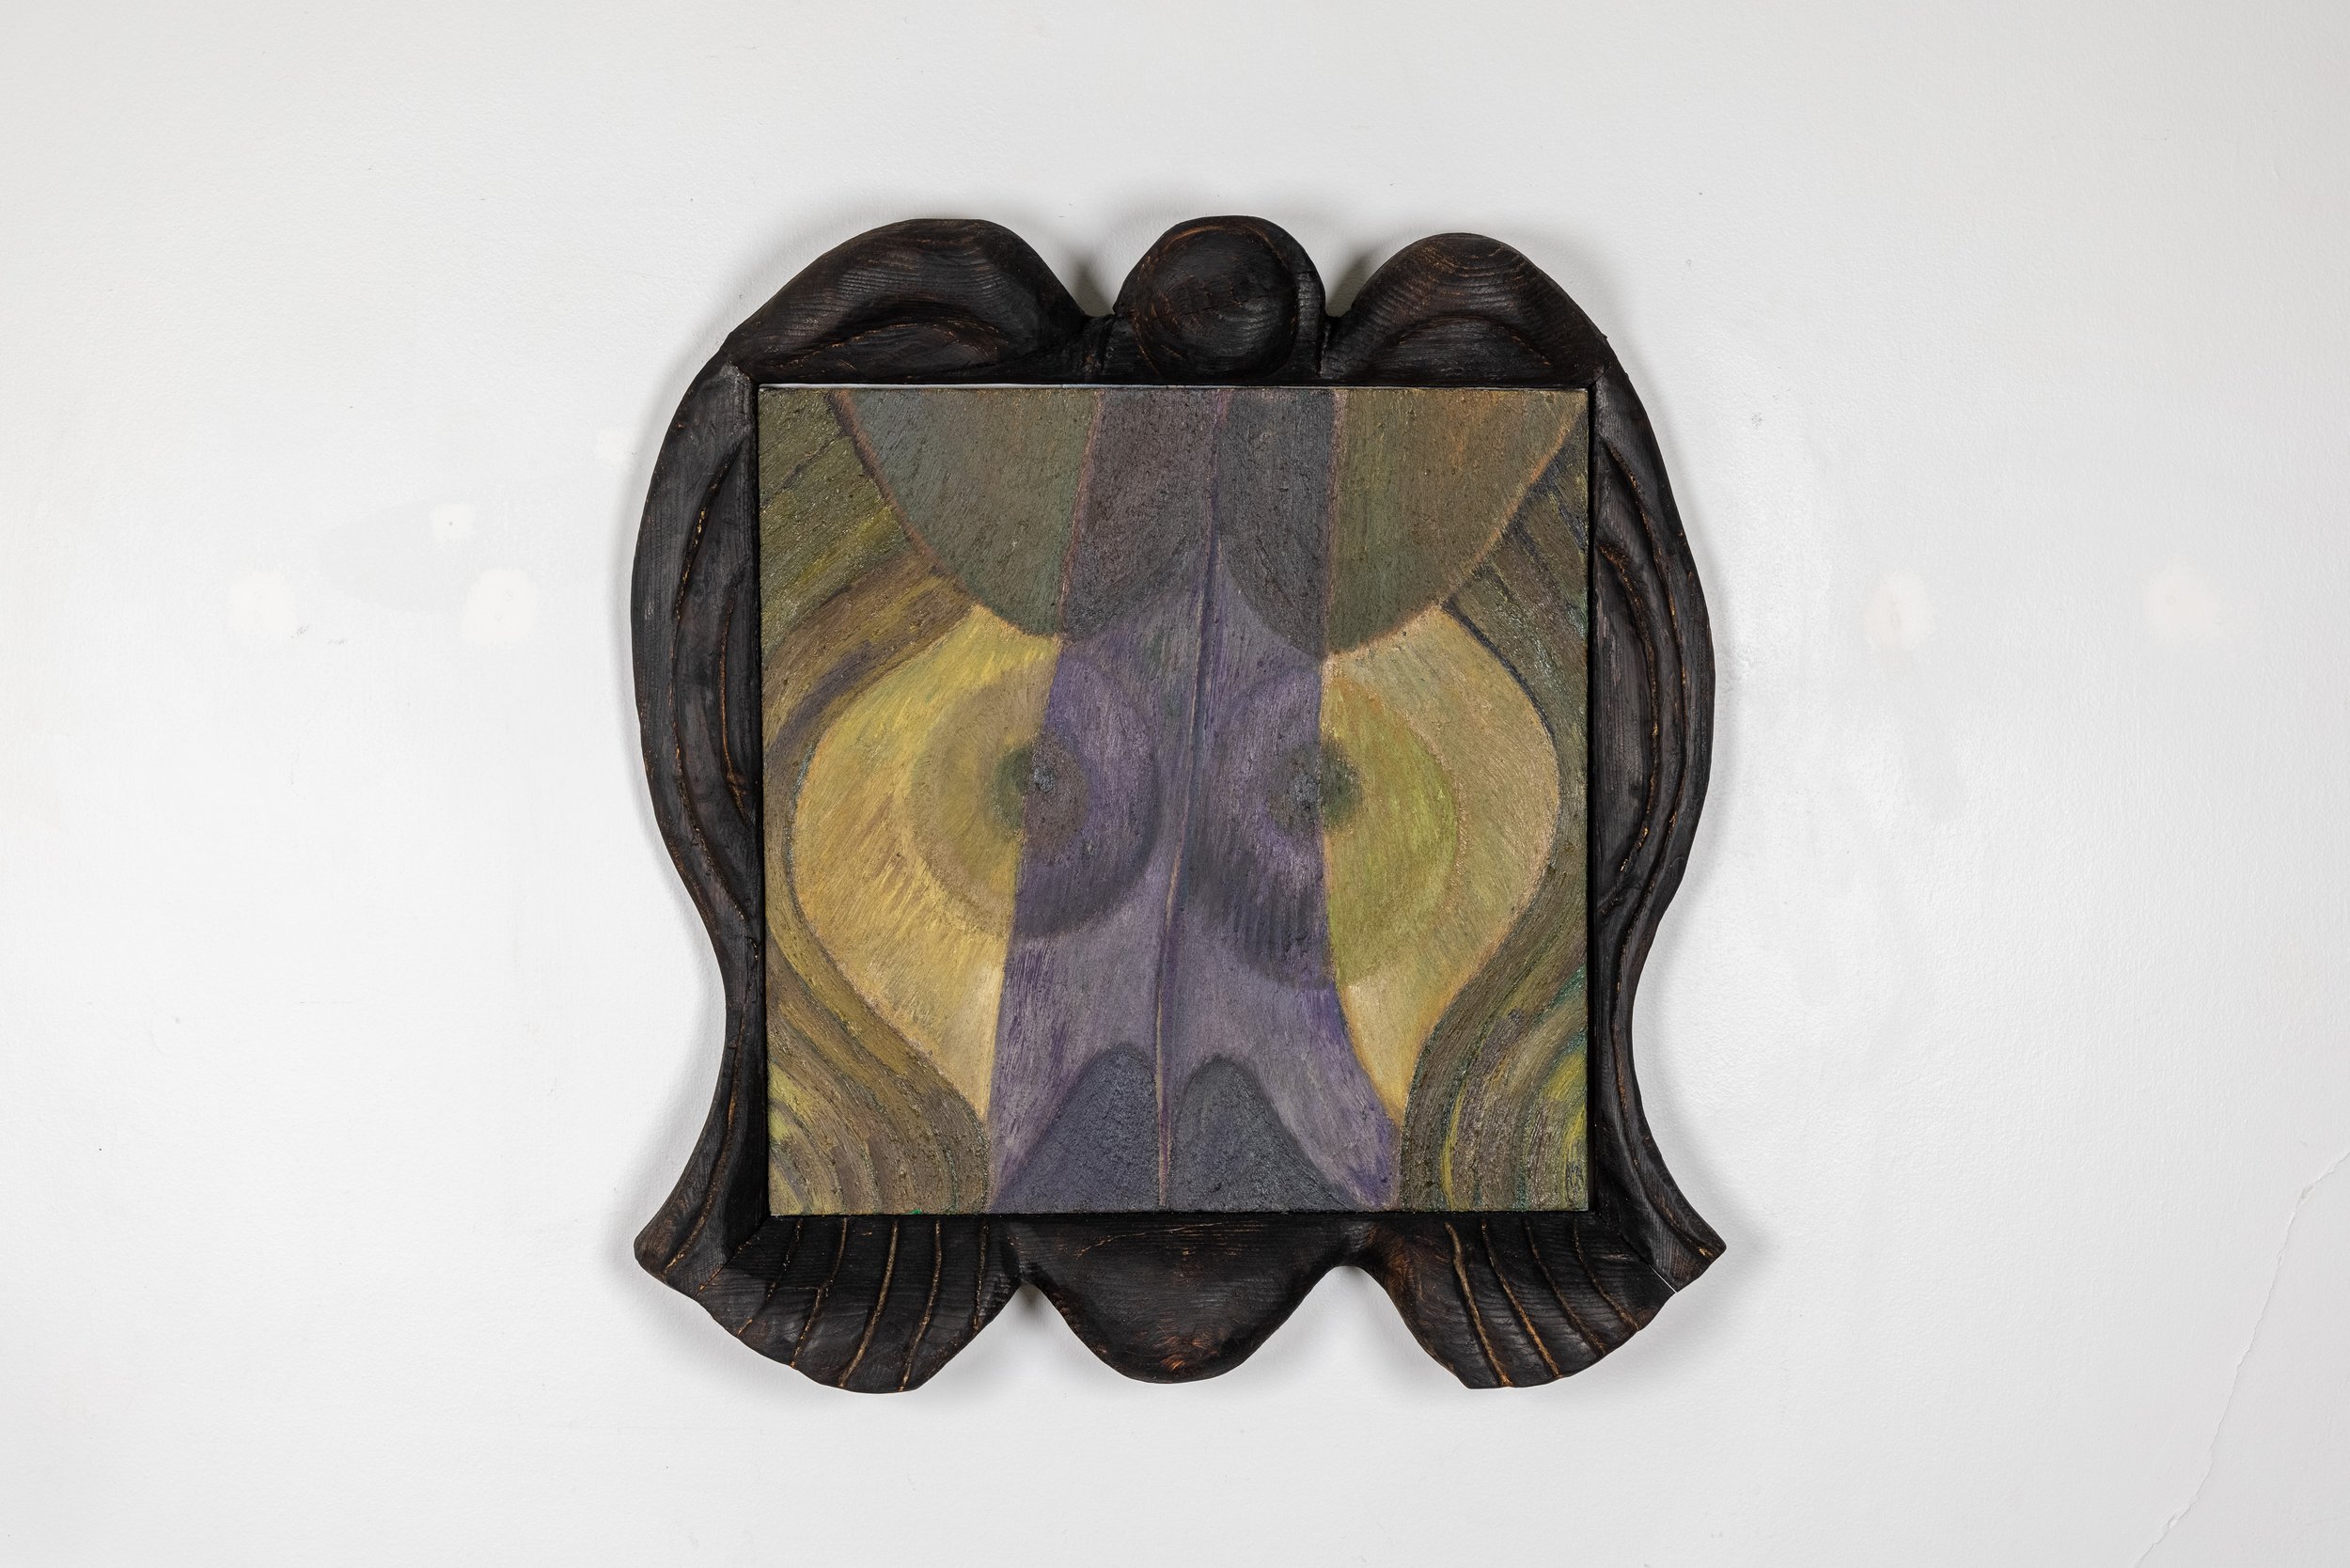  Siren  27” x 29” x 4”  Oil on canvas in charred wood frame  2021 